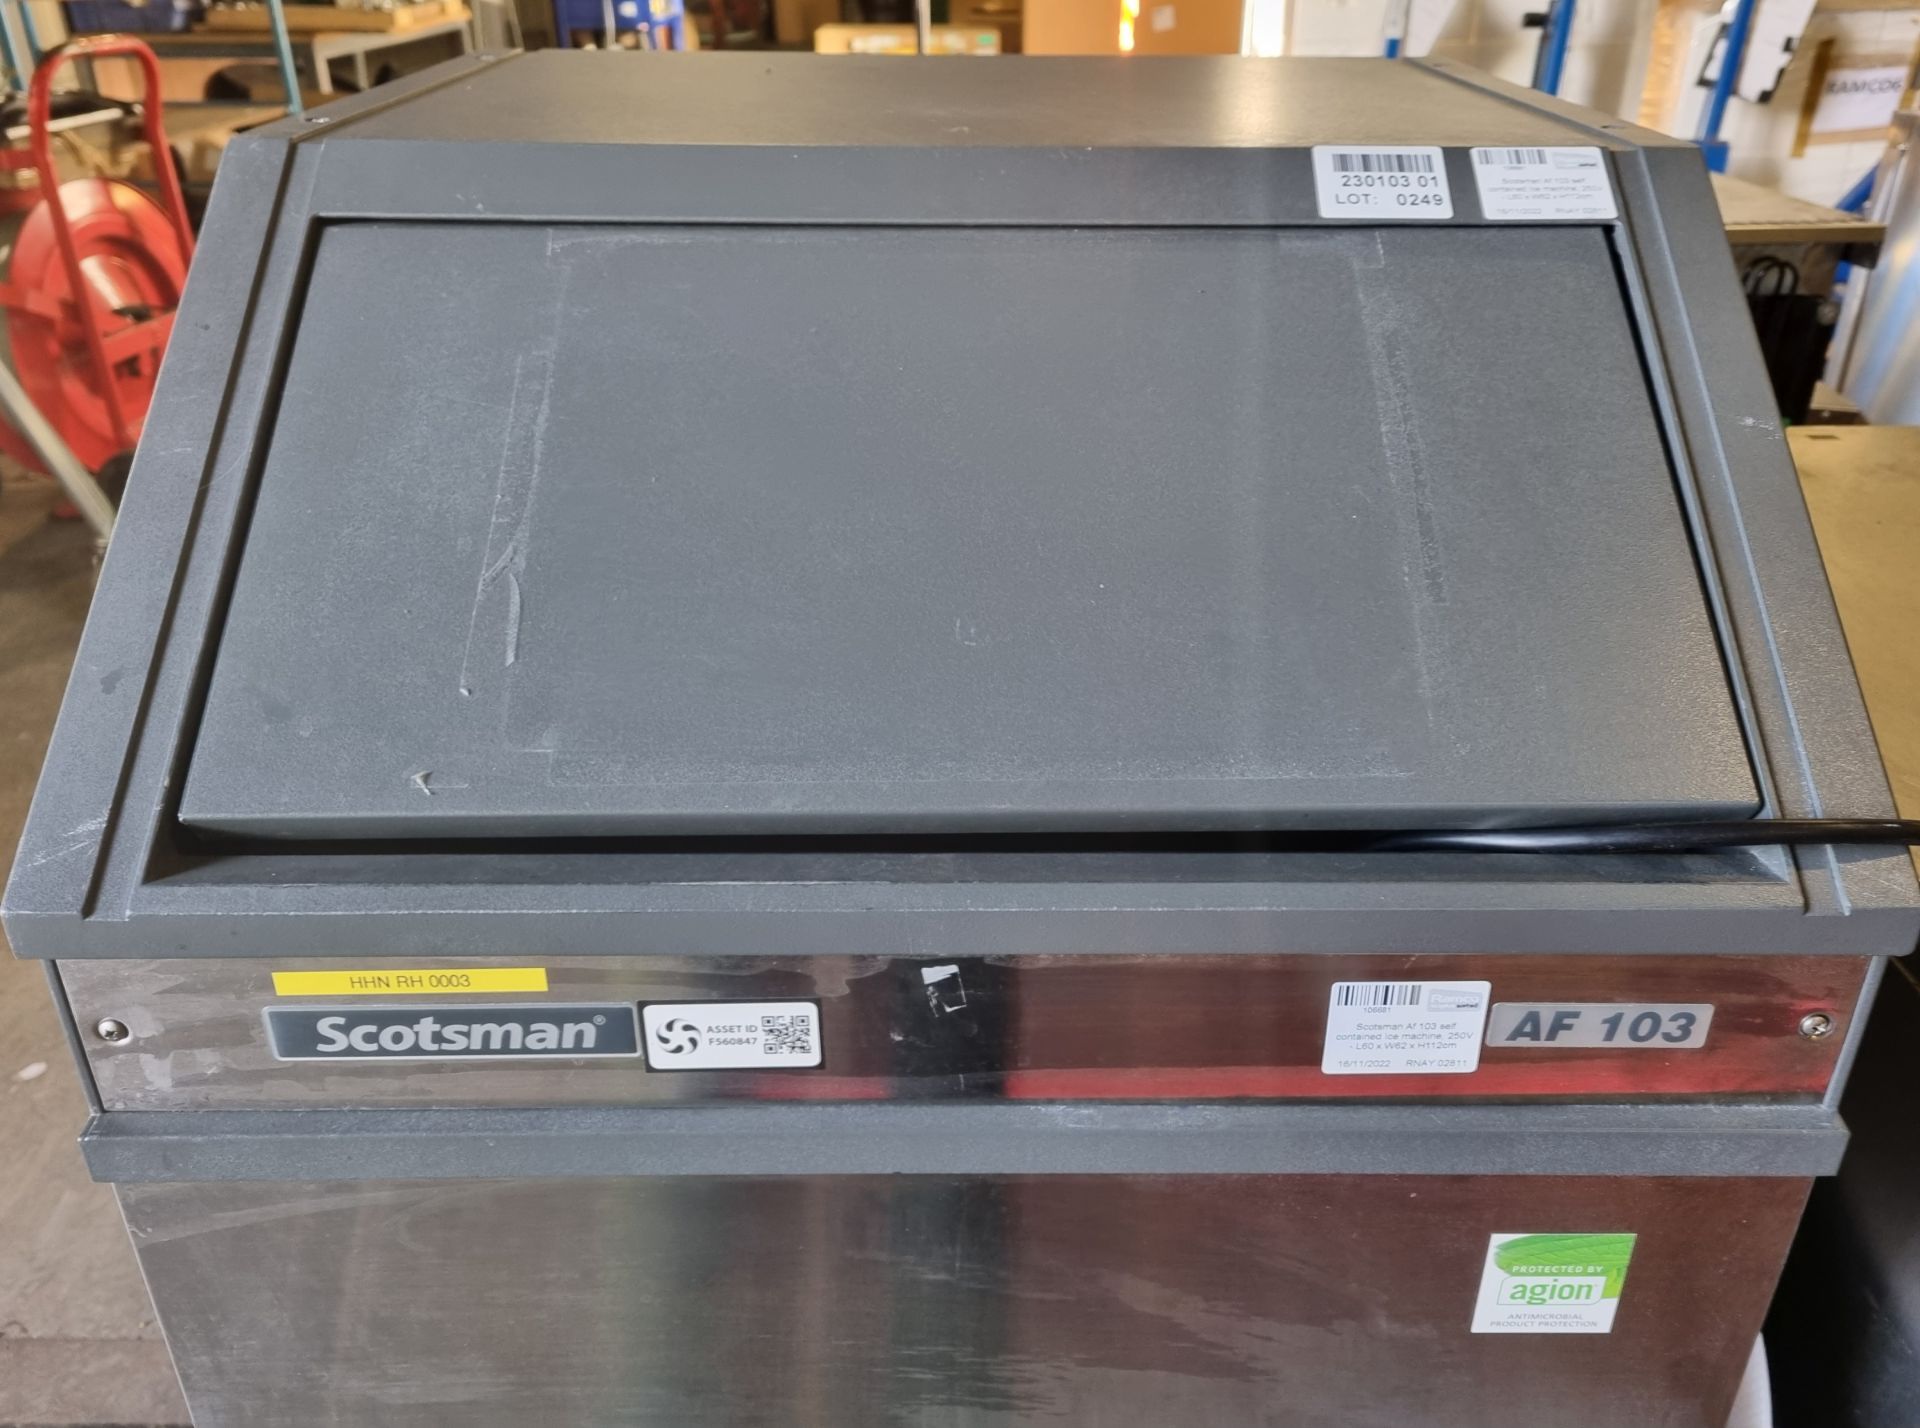 Scotsman Af 103 self contained Ice machine, 250V - L60 x W62 x H112cm - Image 2 of 6